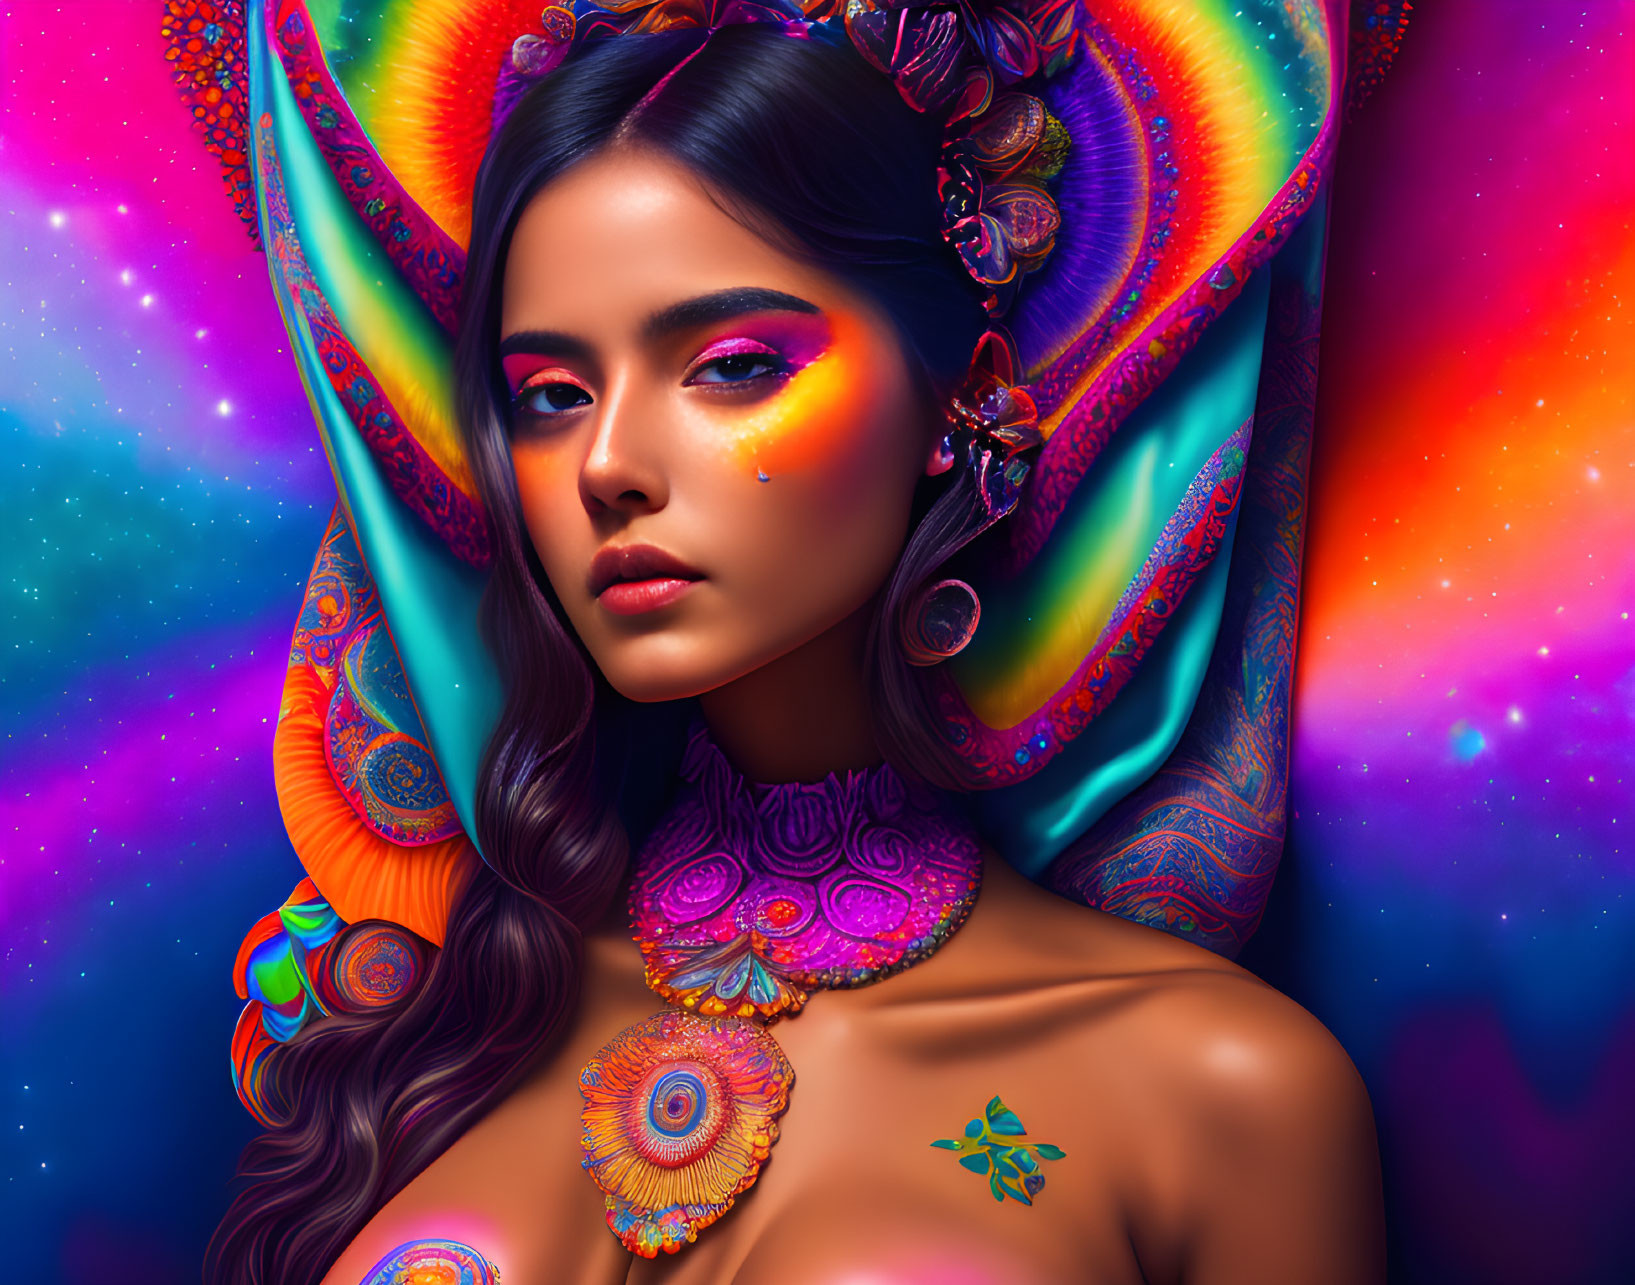 Colorful makeup portrait with cosmic background and intricate accessories